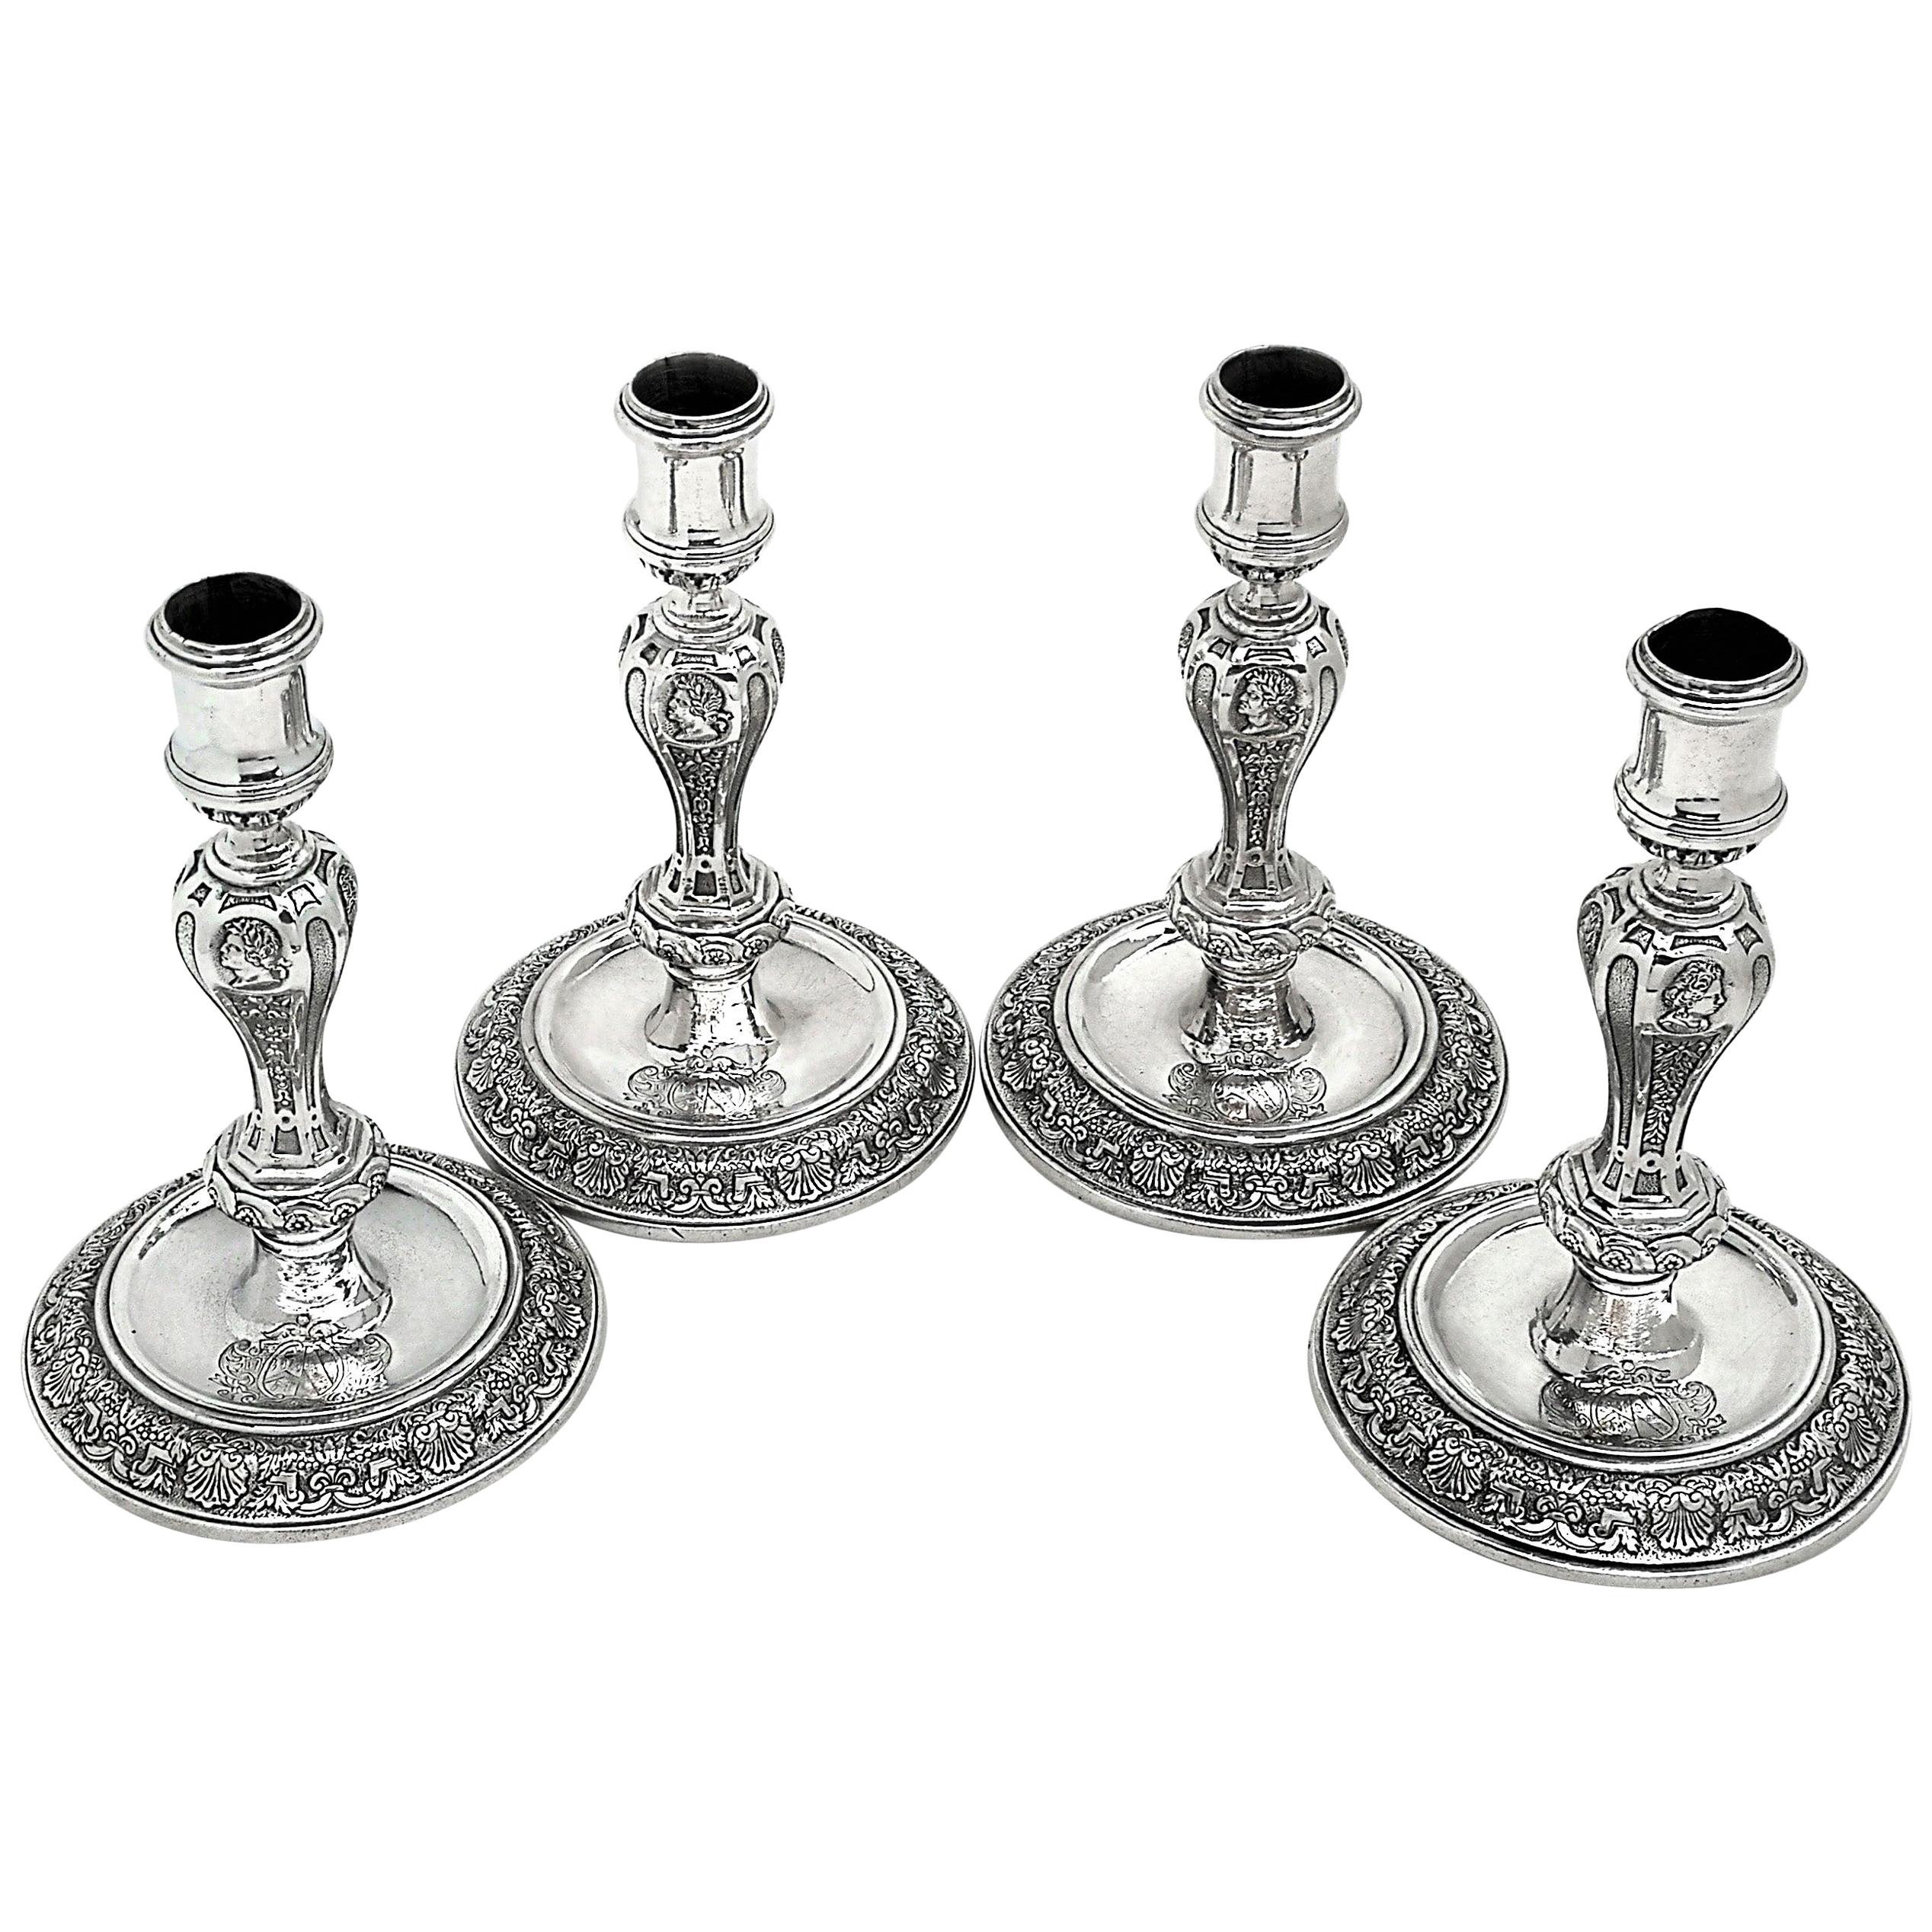 Set of 4 George I Solid Silver Candlesticks 1725 Georgian 18th Century